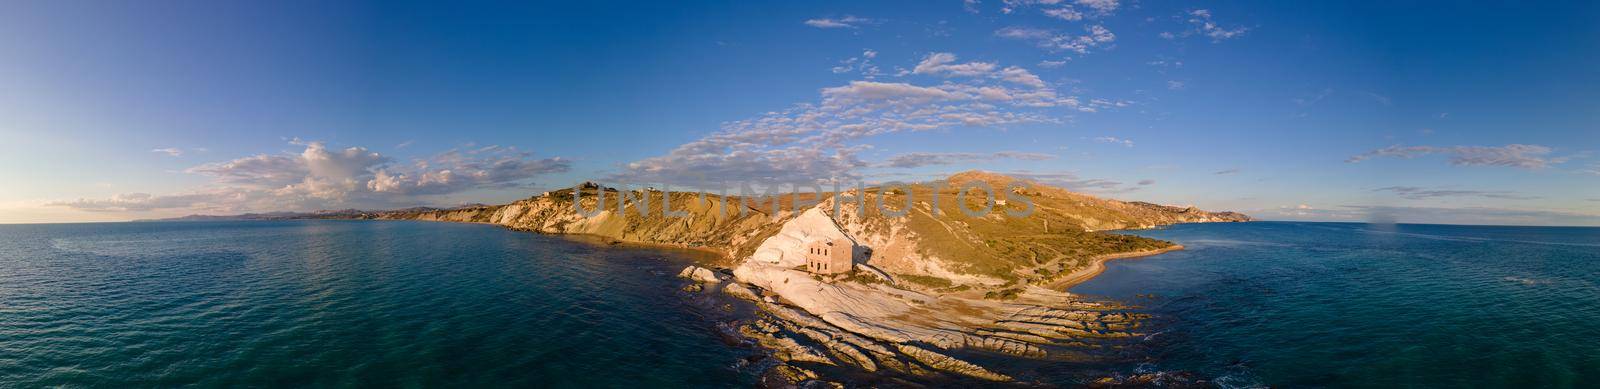 Punta Bianca, Agrigento in Sicily Italy White beach with old ruins of abandoned stone house on white cliffs Sicilia Italy by fokkebok